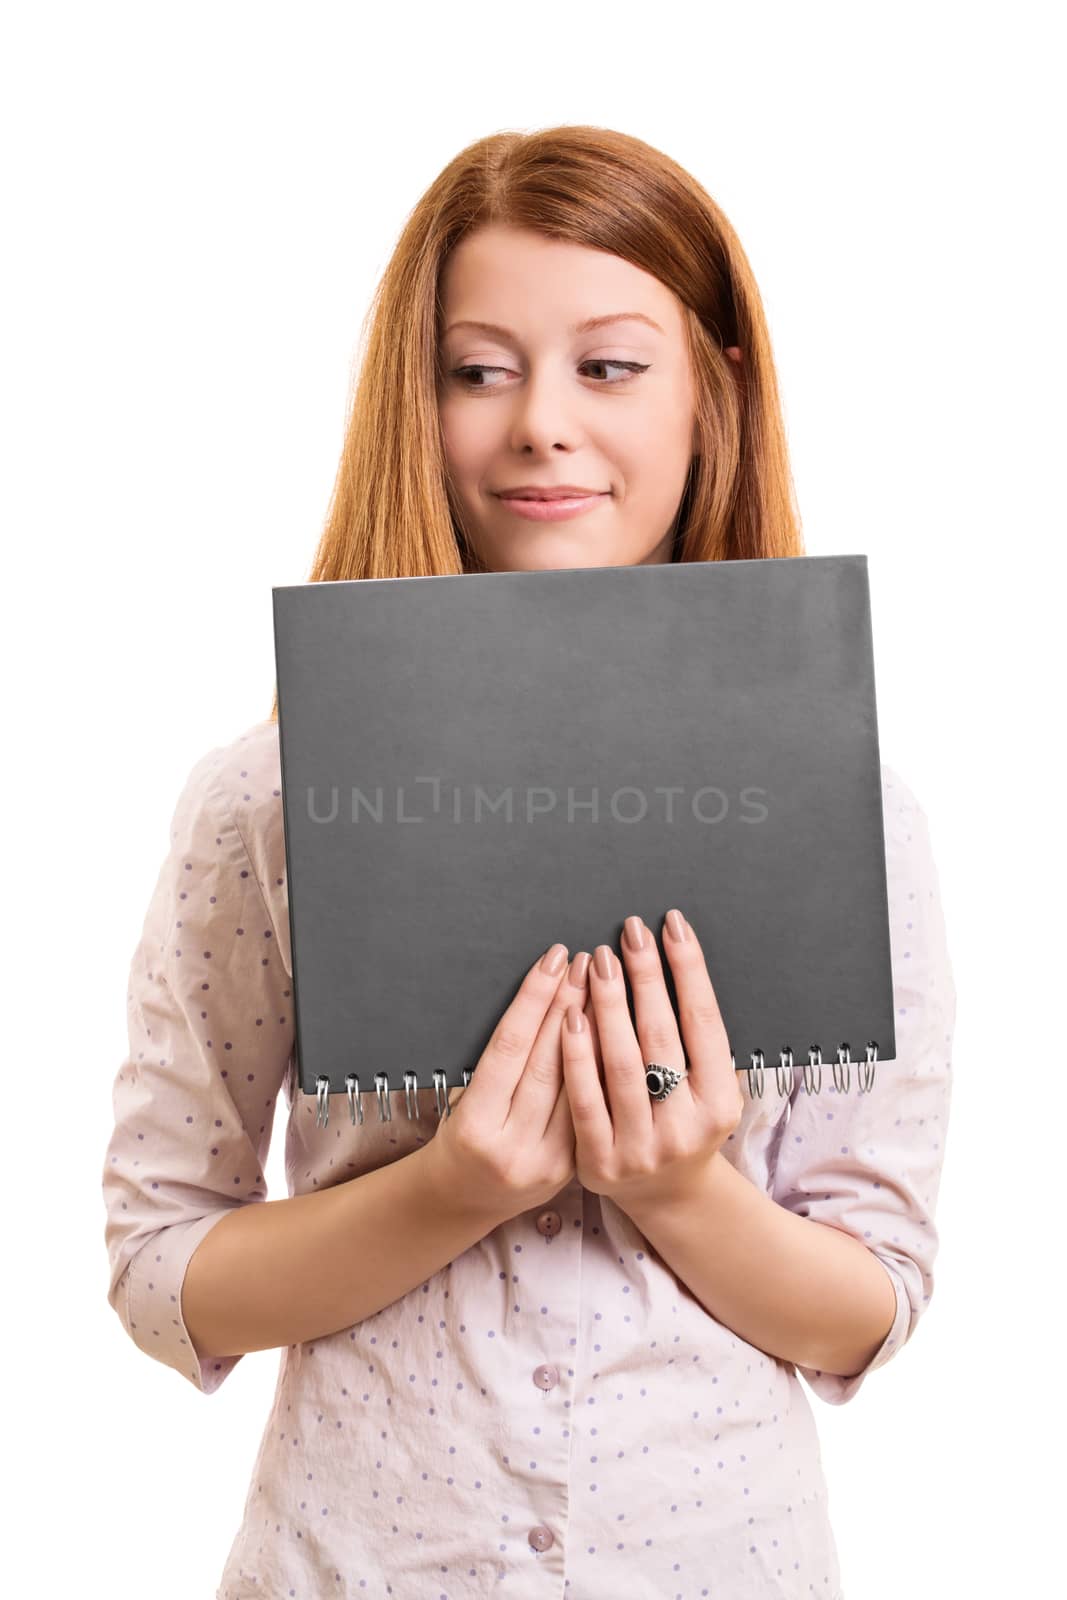 A portrait of a smiling beautiful girl, holding a book, isolated on white background.